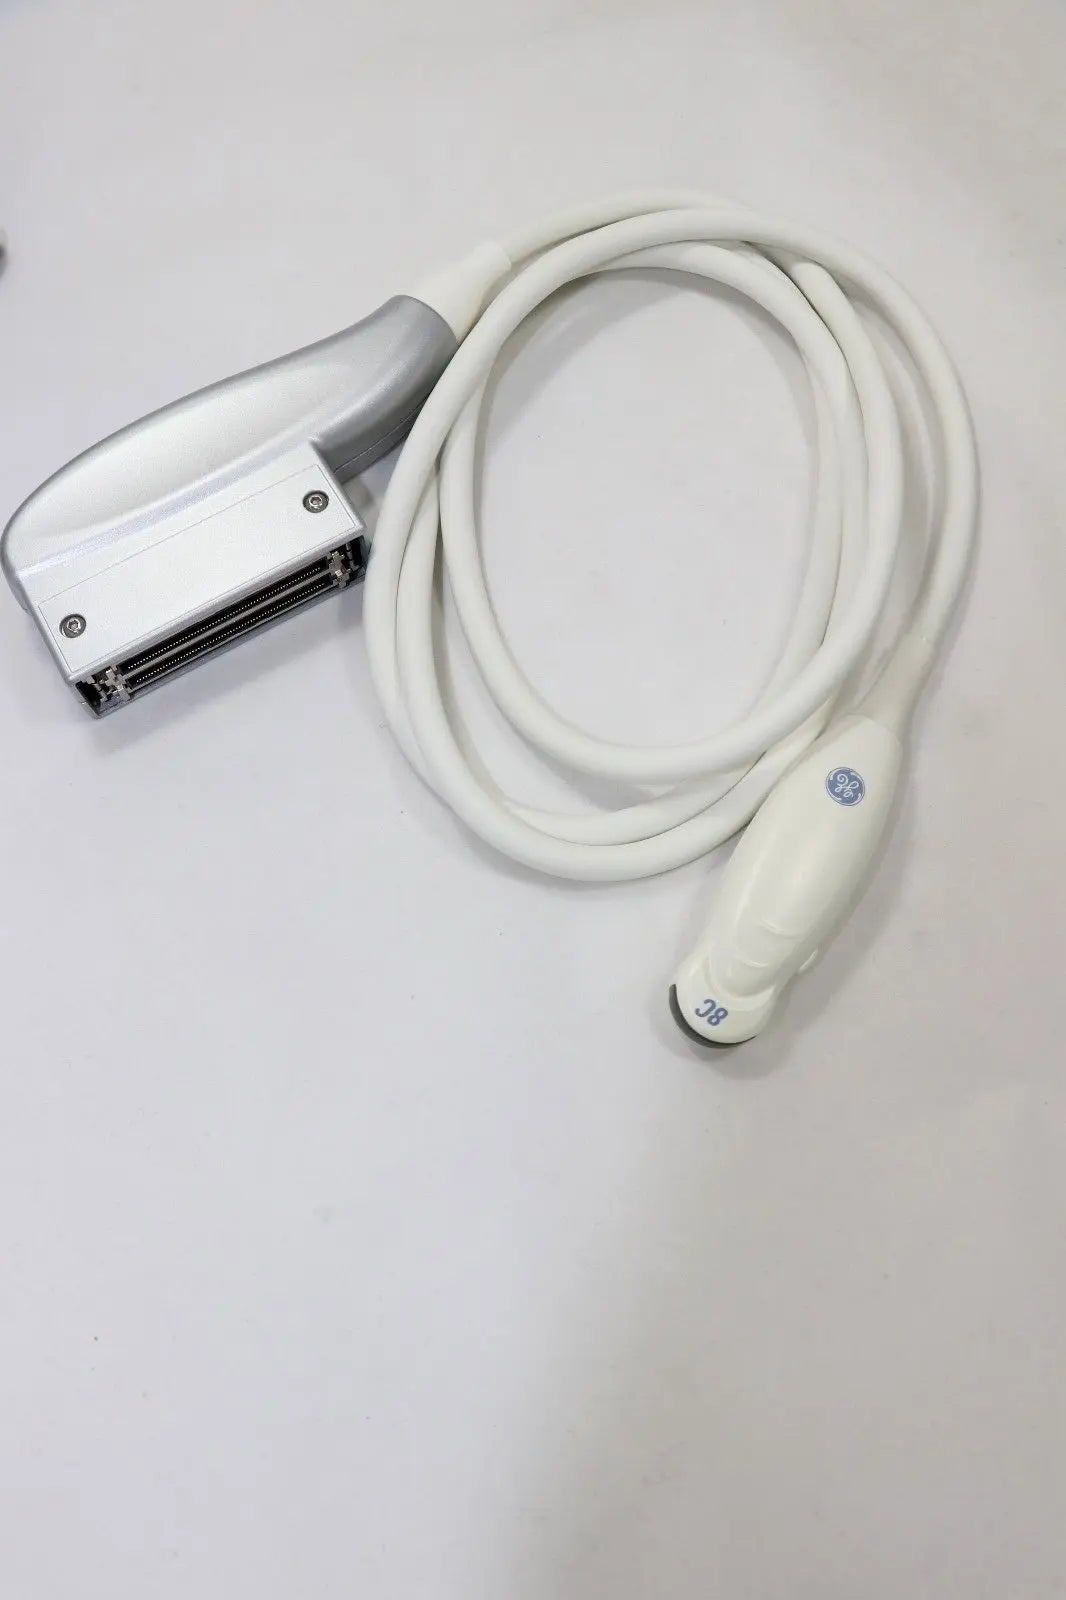 *New Open Box* GE 8C-RS Ultrasound Transducer